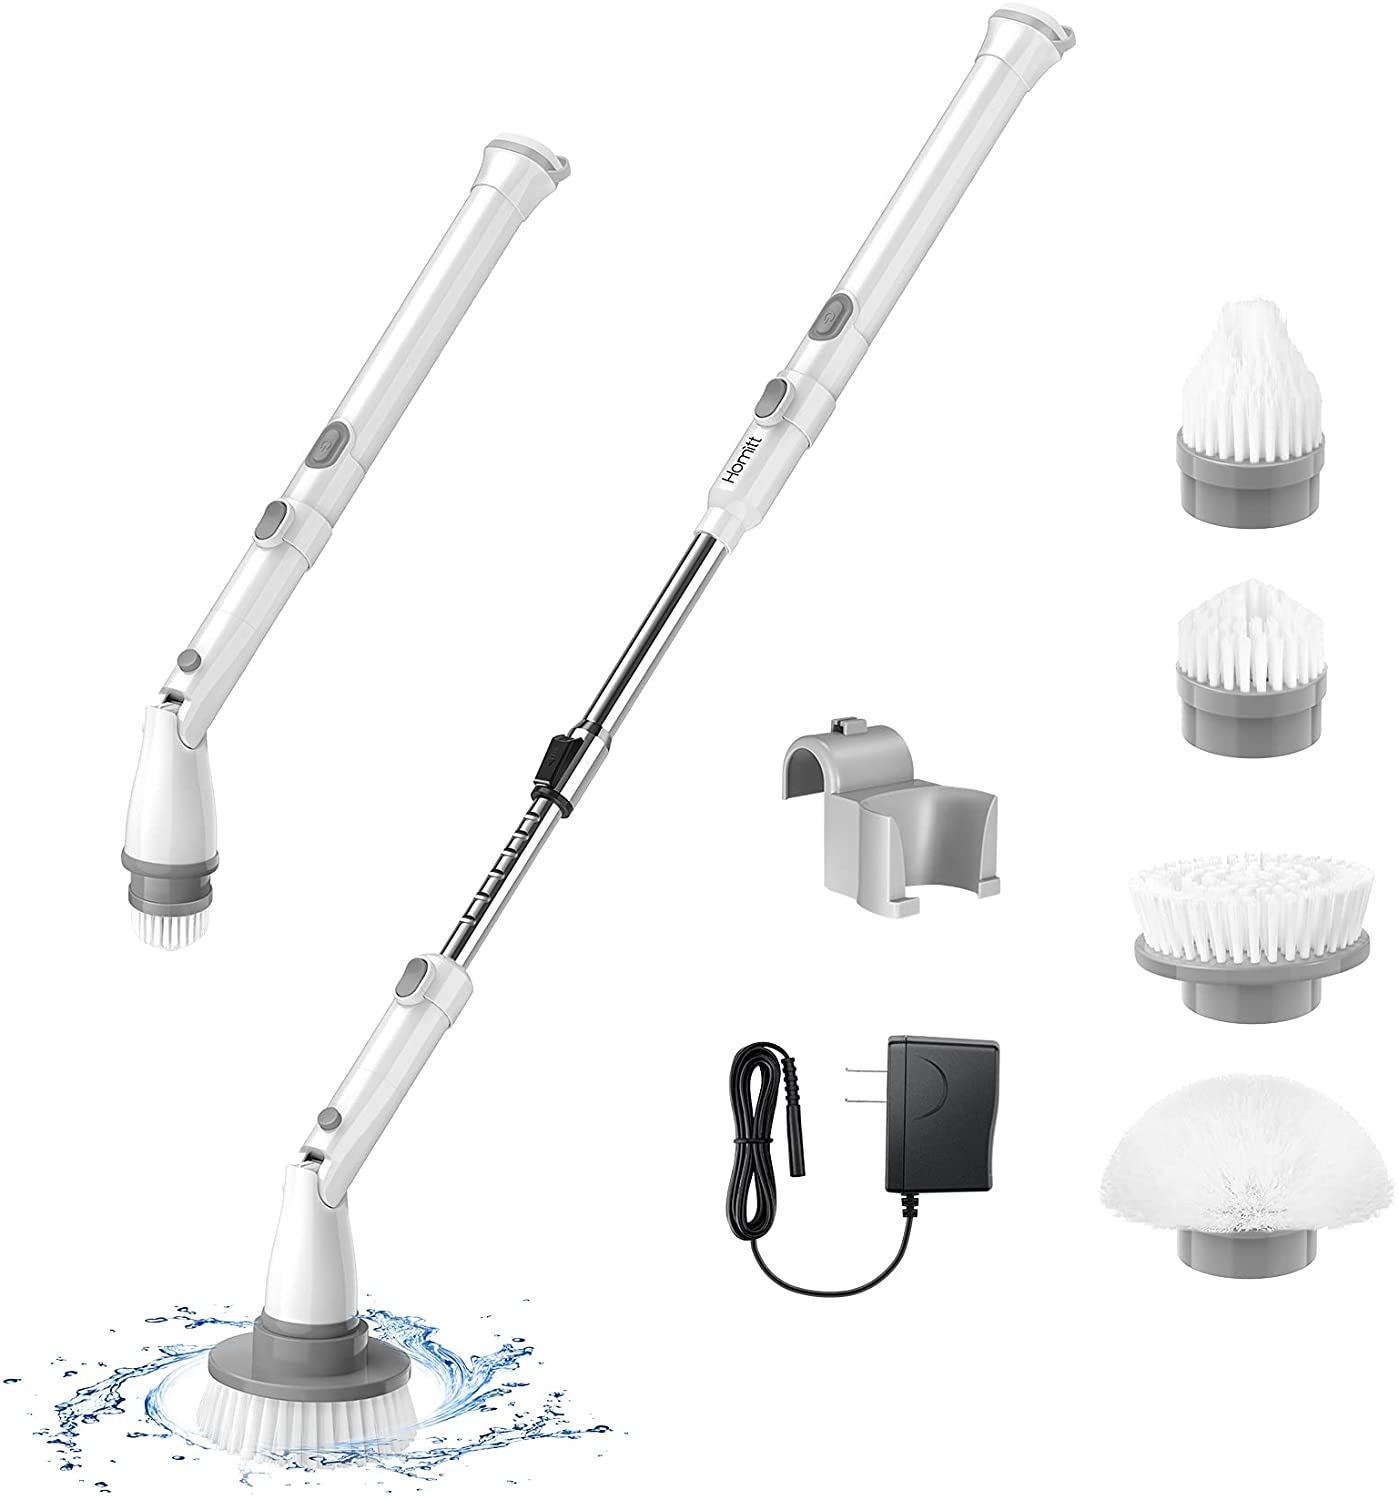 https://www.wideopencountry.com/wp-content/uploads/sites/4/eats/2021/06/Homitt-Electric-Spin-Cordless-Shower-Built-in-2-Batteries-360-Power-Bathroom-Scrubber-with-4-Replaceable-Cleaning-Brush-Head-and-Adjustable-Extension-Handle-for-Tub-Tile-Floor-White.jpg?resize=1399%2C1500